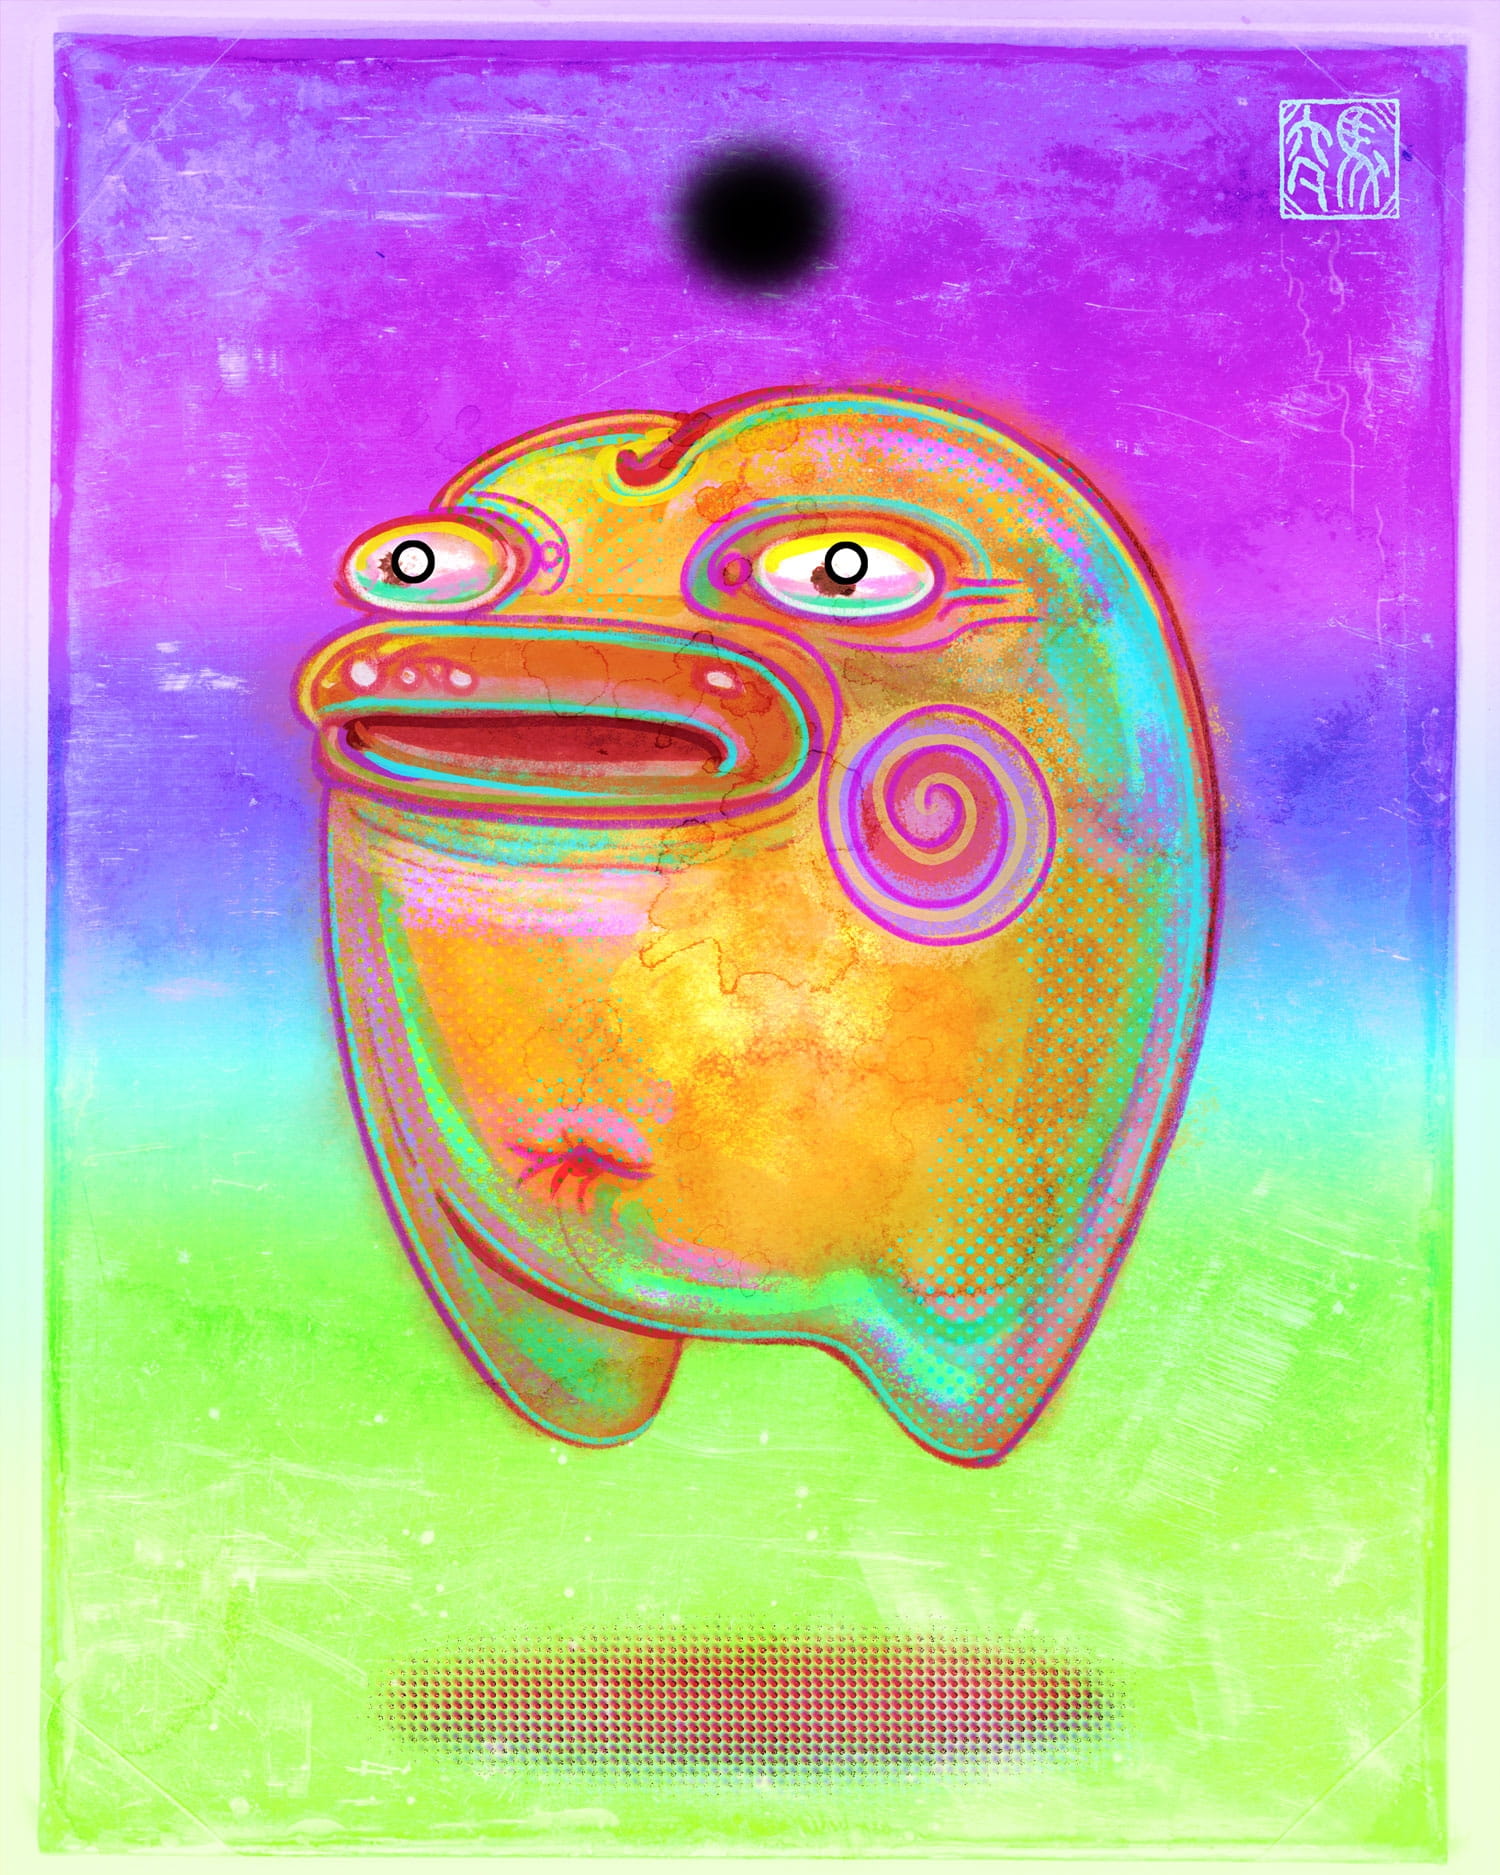 Hyperneon peach-oid creature with a face and spiral-rosy cheeks floating above a garishly colored background.